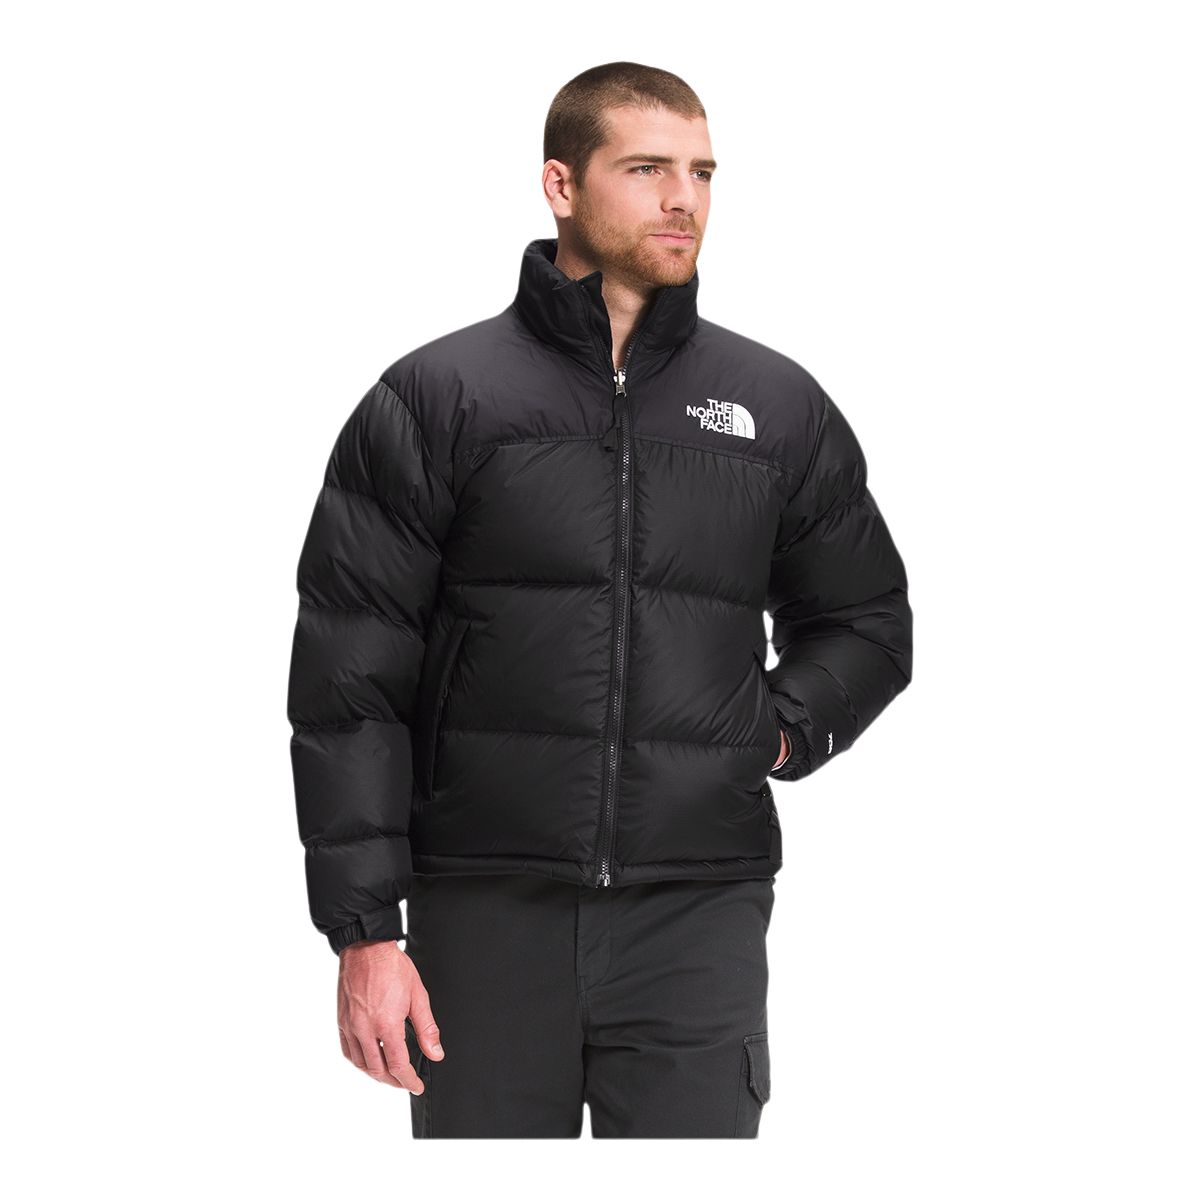 The North Face Men's Nuptse Winter Jacket, Short, Insulated, Water Repellent